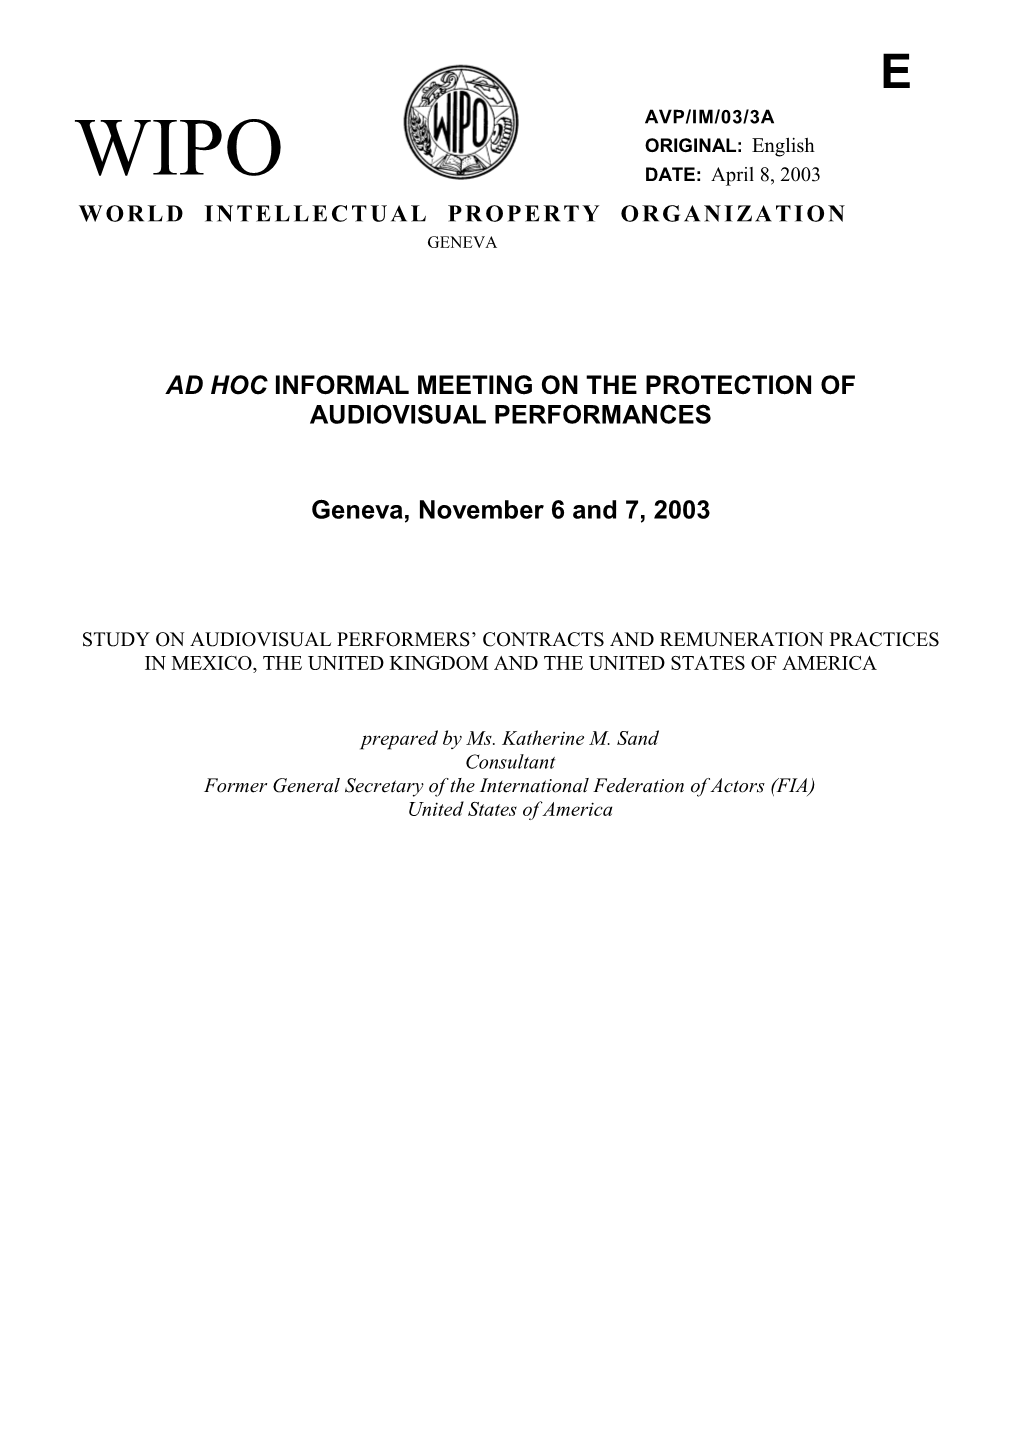 AVP/IM/03/3A: Study on Audiovisual Performers' Contracts and Remuneration Practices In